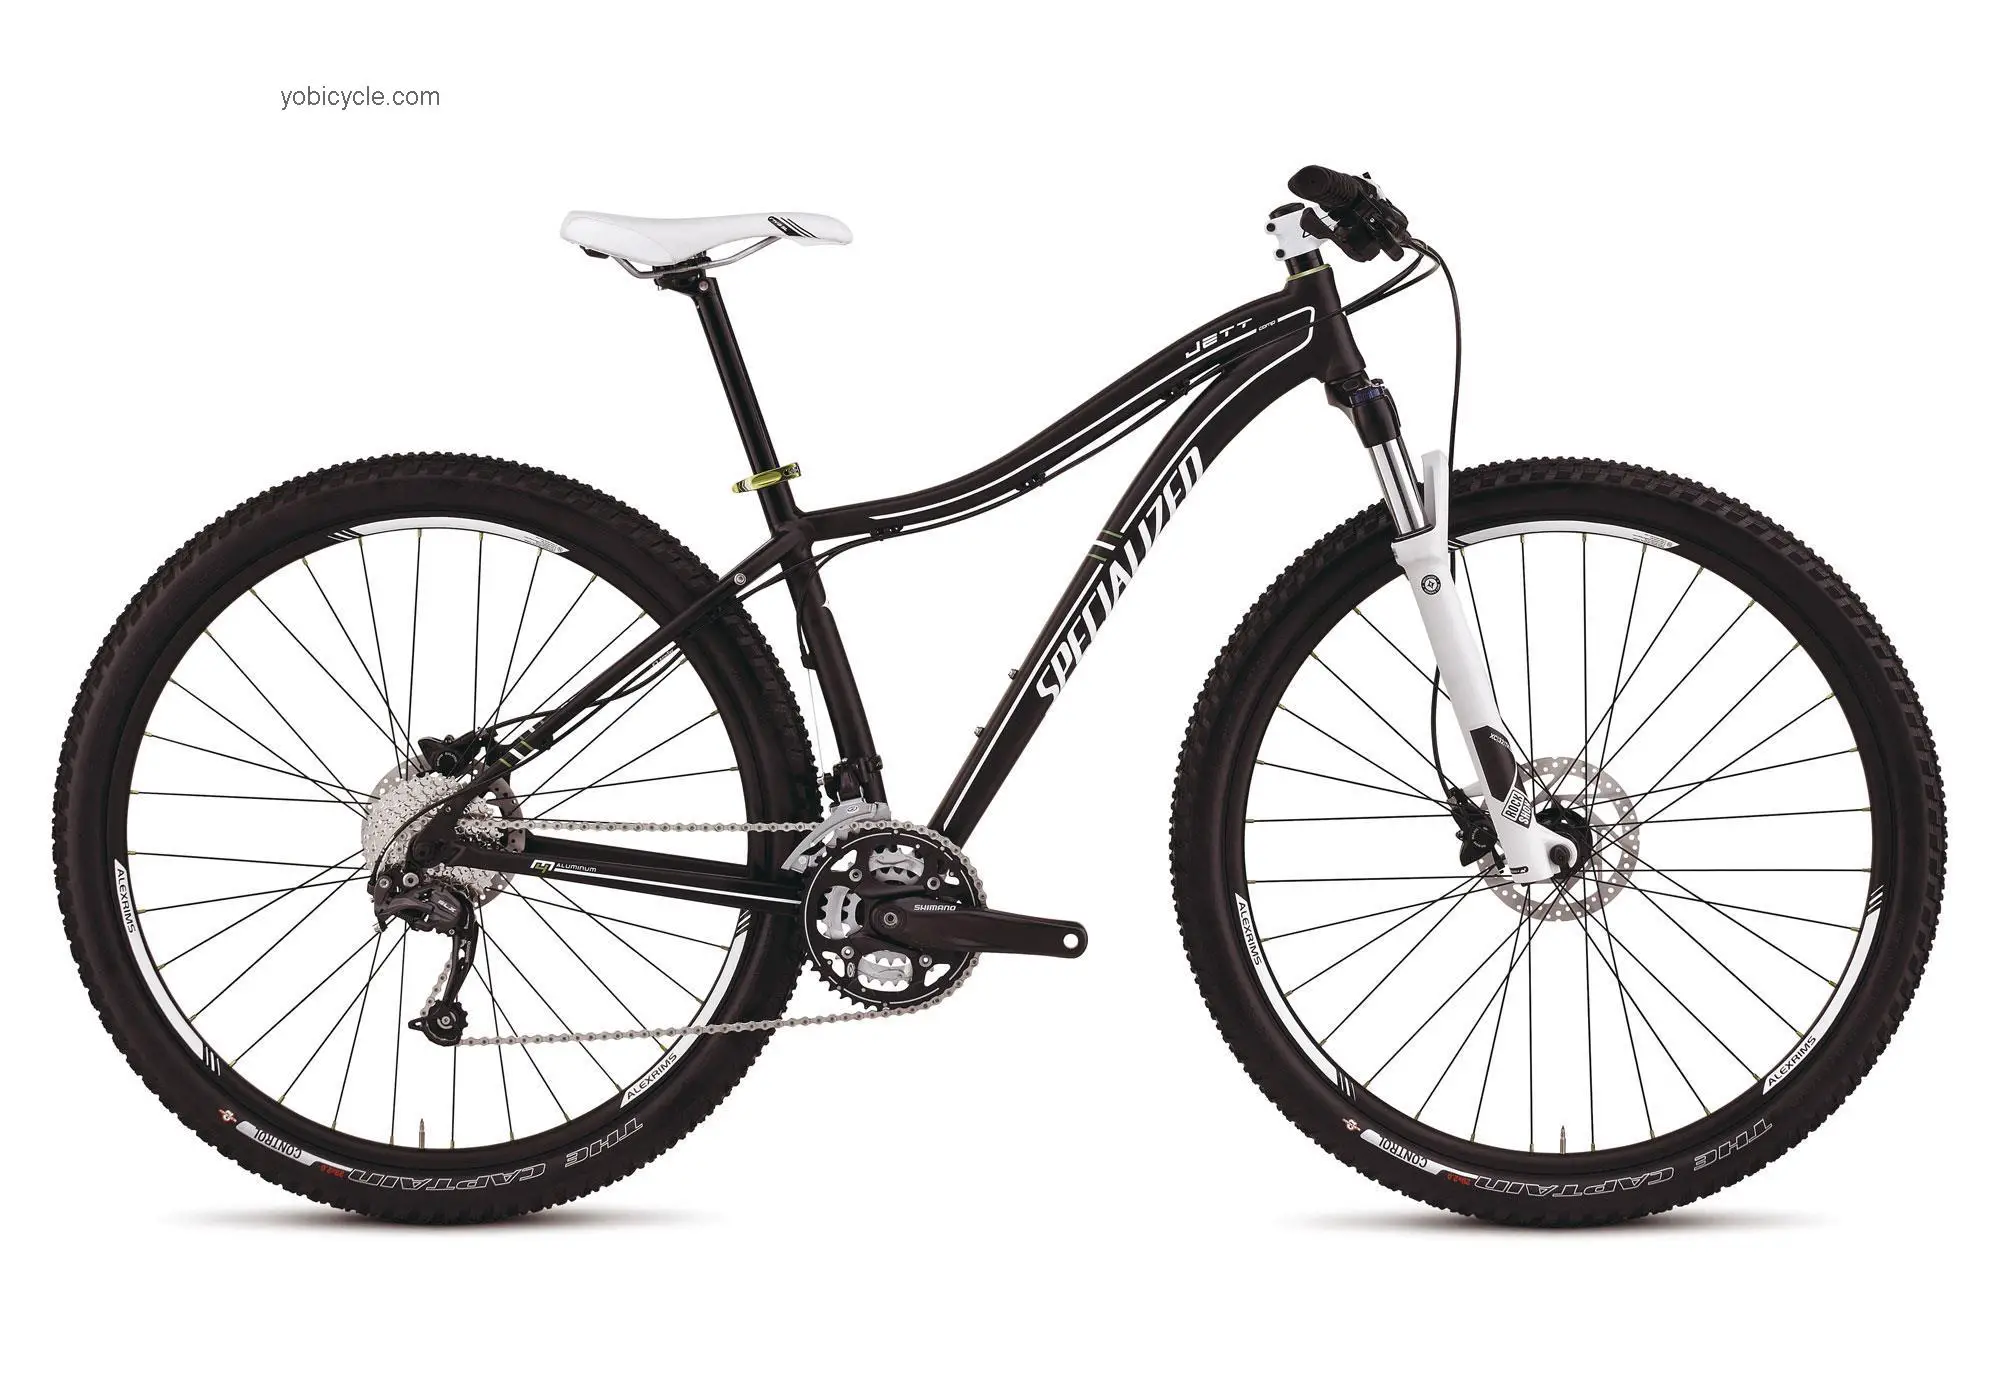 Specialized Jett Comp 29 2012 comparison online with competitors